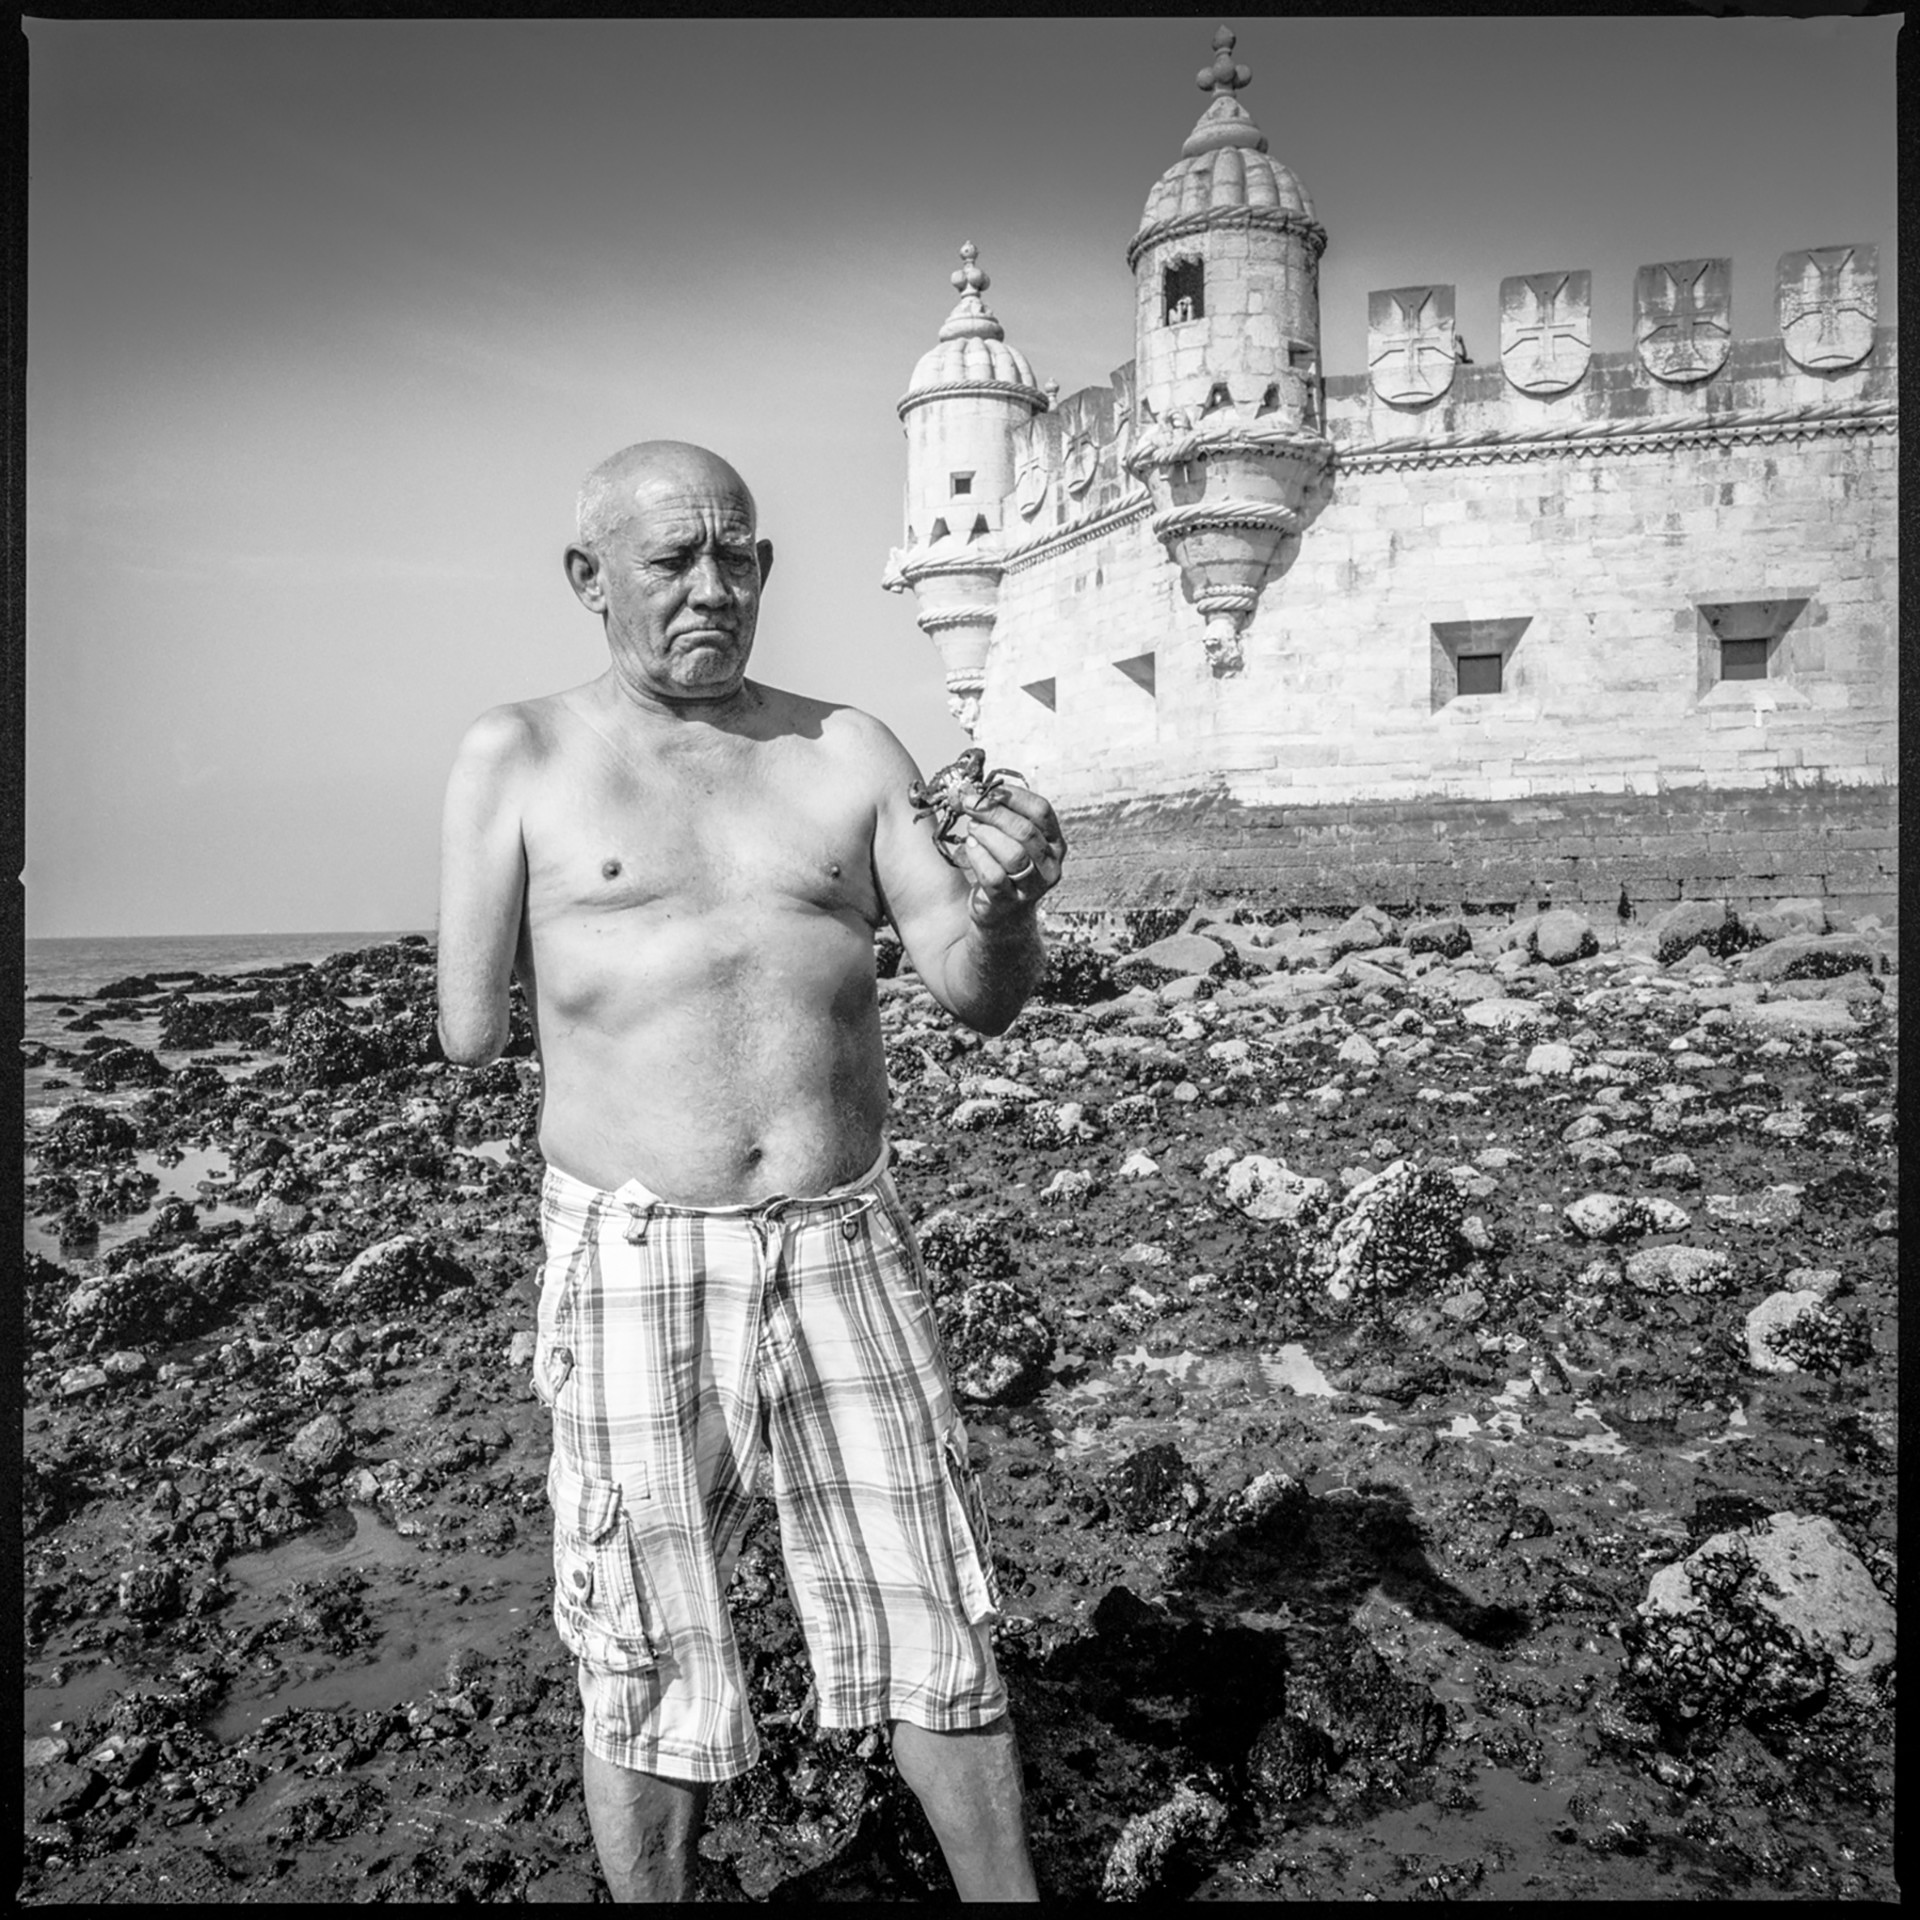 Man on Shore - Lisbon, Portugal by Kevin Greenblat